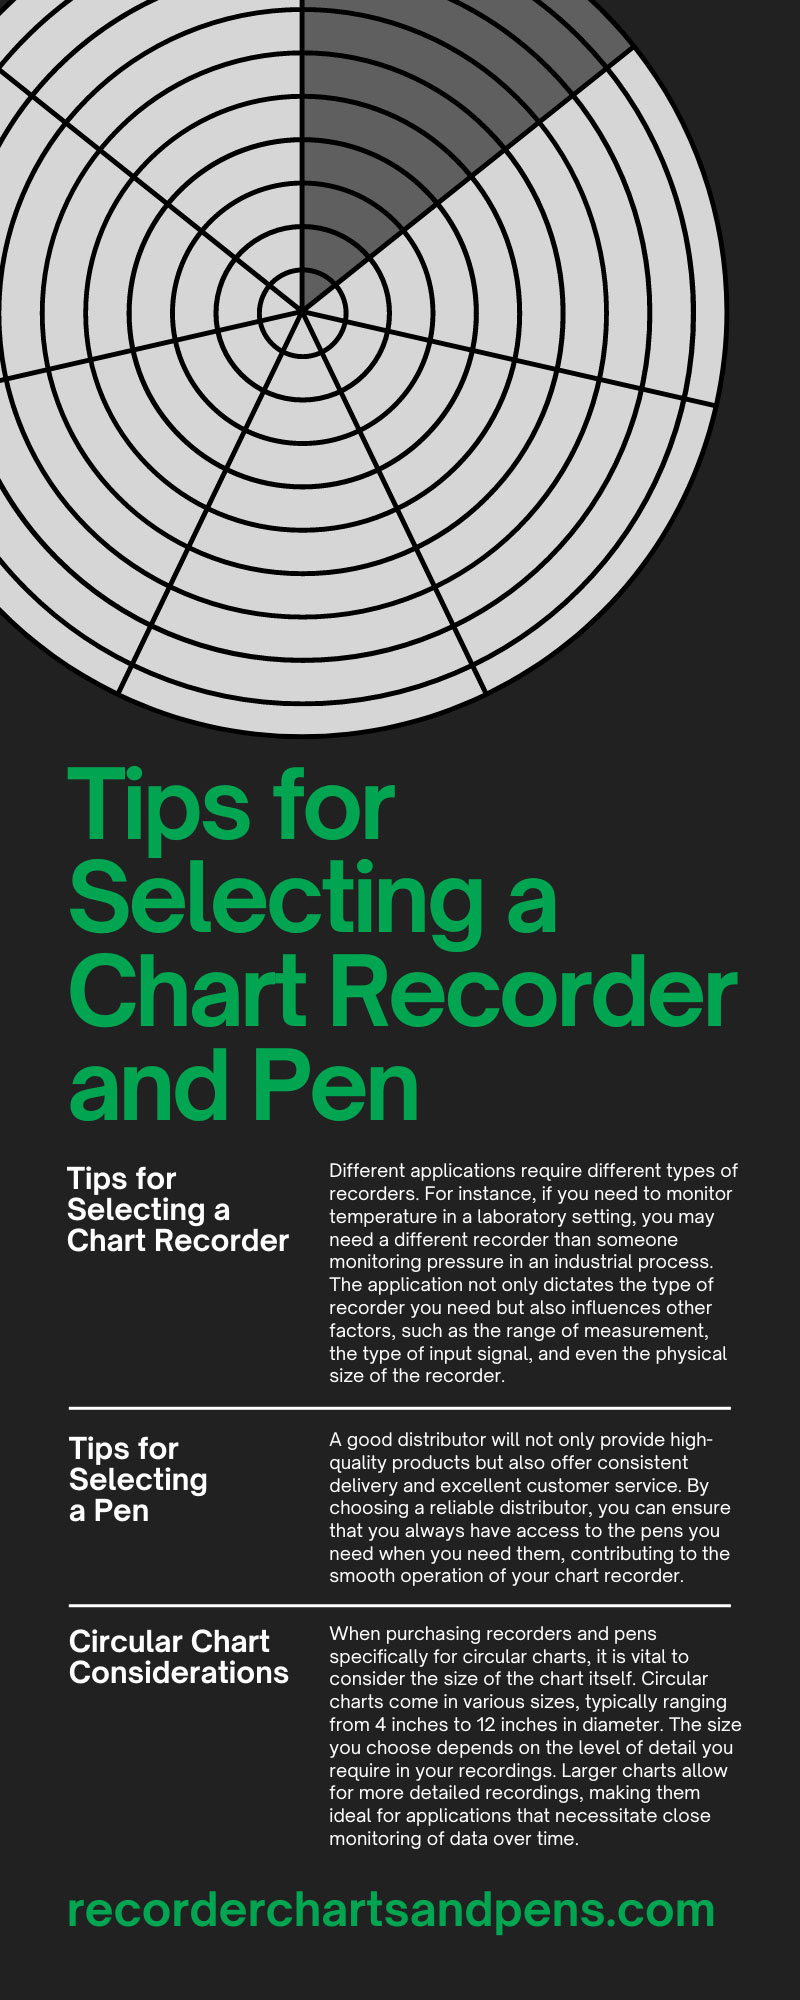 Tips for Selecting a Chart Recorder and Pen